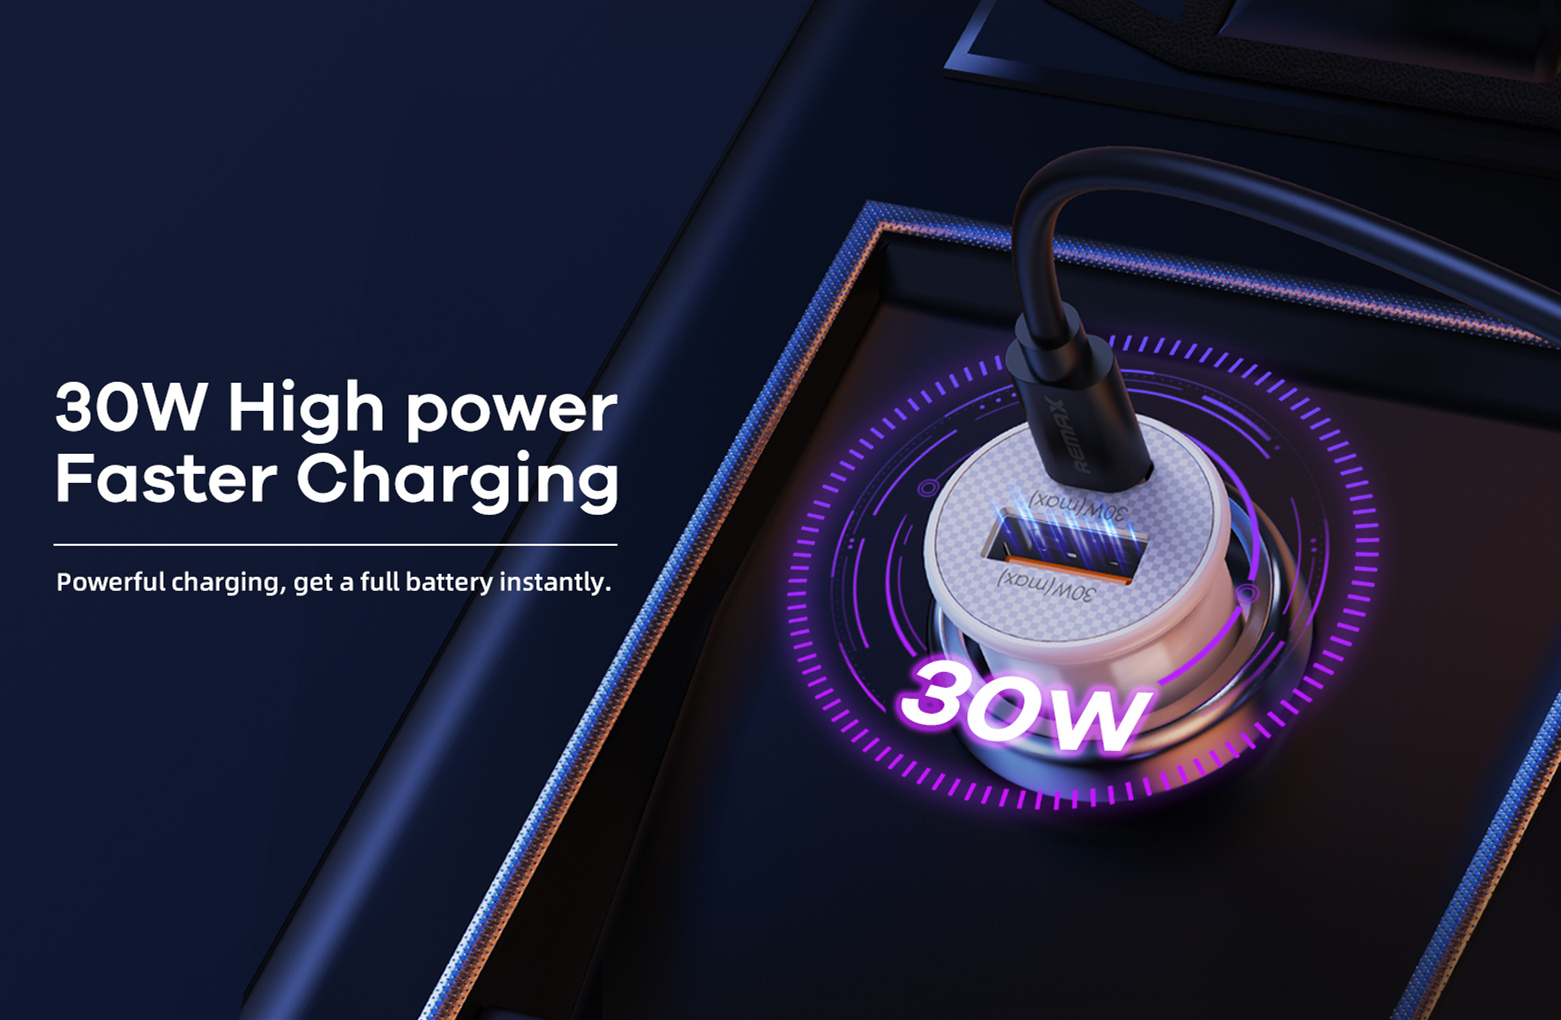 RCC231 Chanyo Series Dual Output 30W PD + QC Fast Charging Car Charger for Samsung Galaxy S21 Note S20 ultra Huawei Mate40 P50 OnePlus 9 Pro for iPhone 12 Pro Max